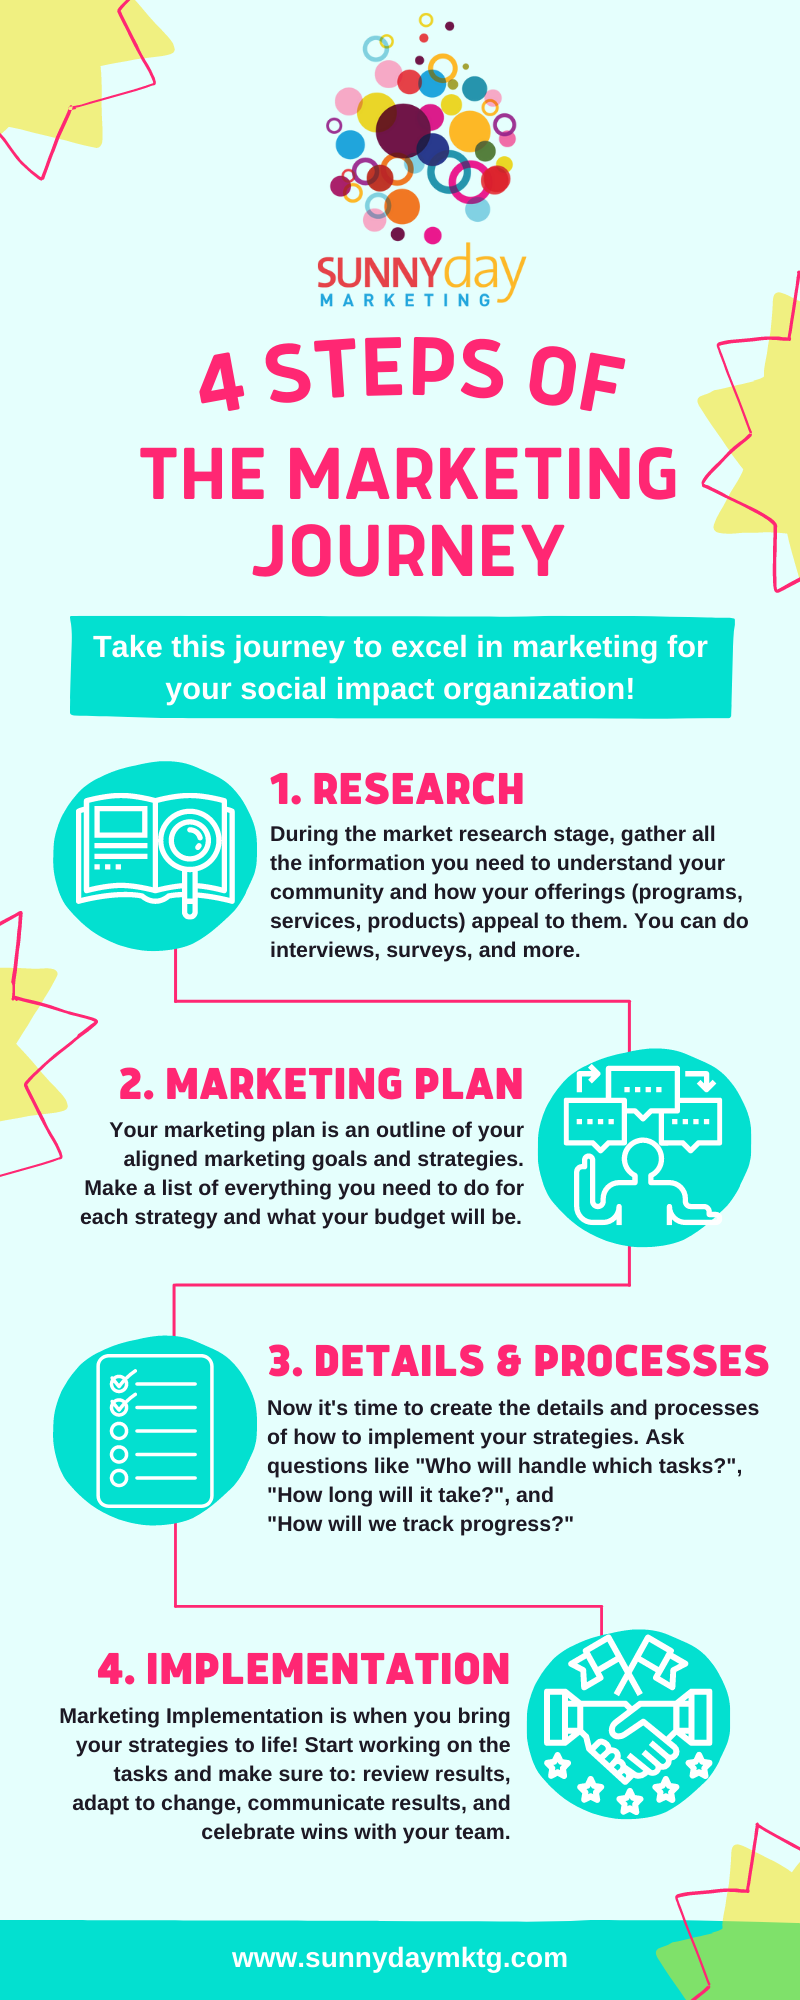 Step Up Your Marketing Journey – The Sunny Day Way